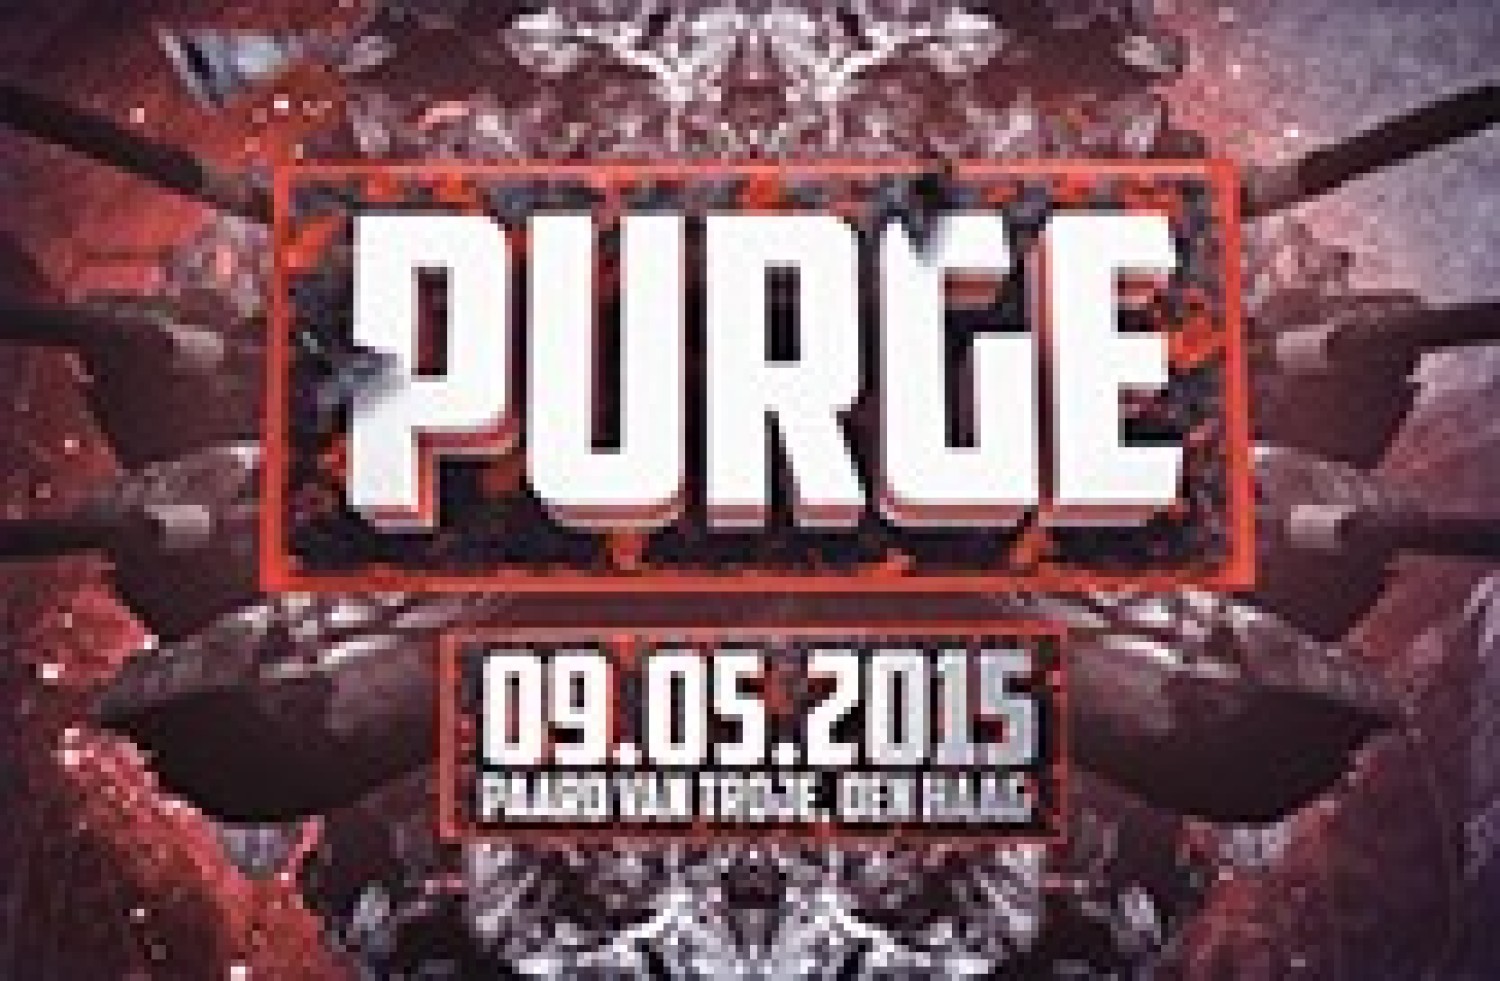 Party report: Purge, Den Haag (09-05-2015)